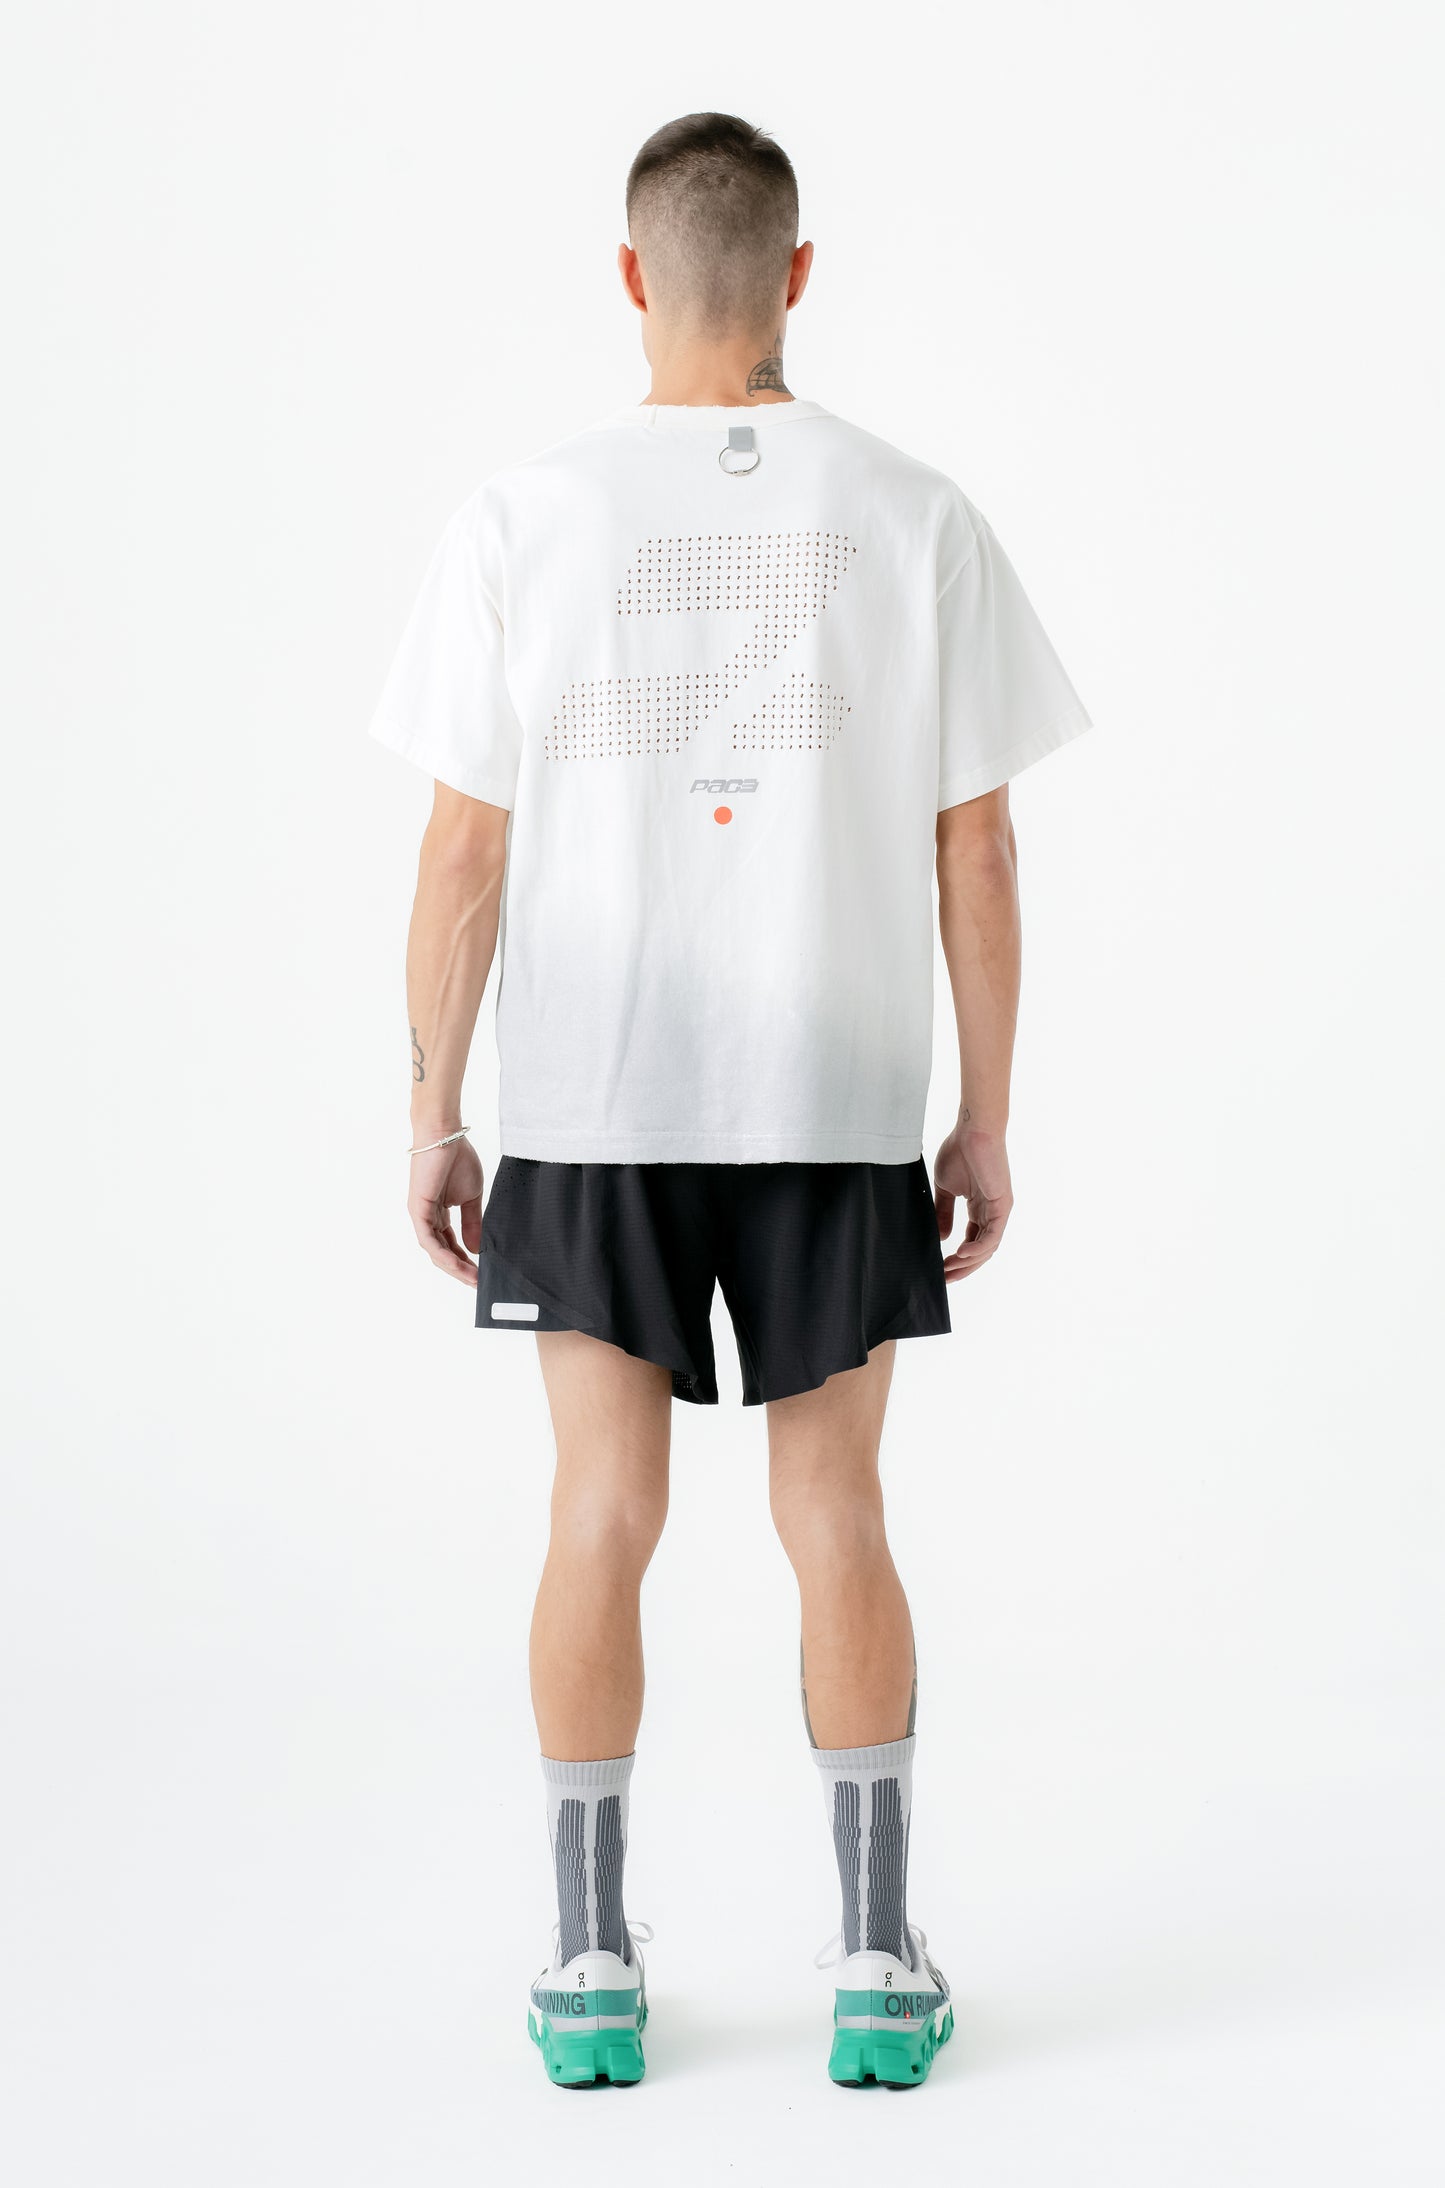 PACE - DT2 Laser Tee "Off White"